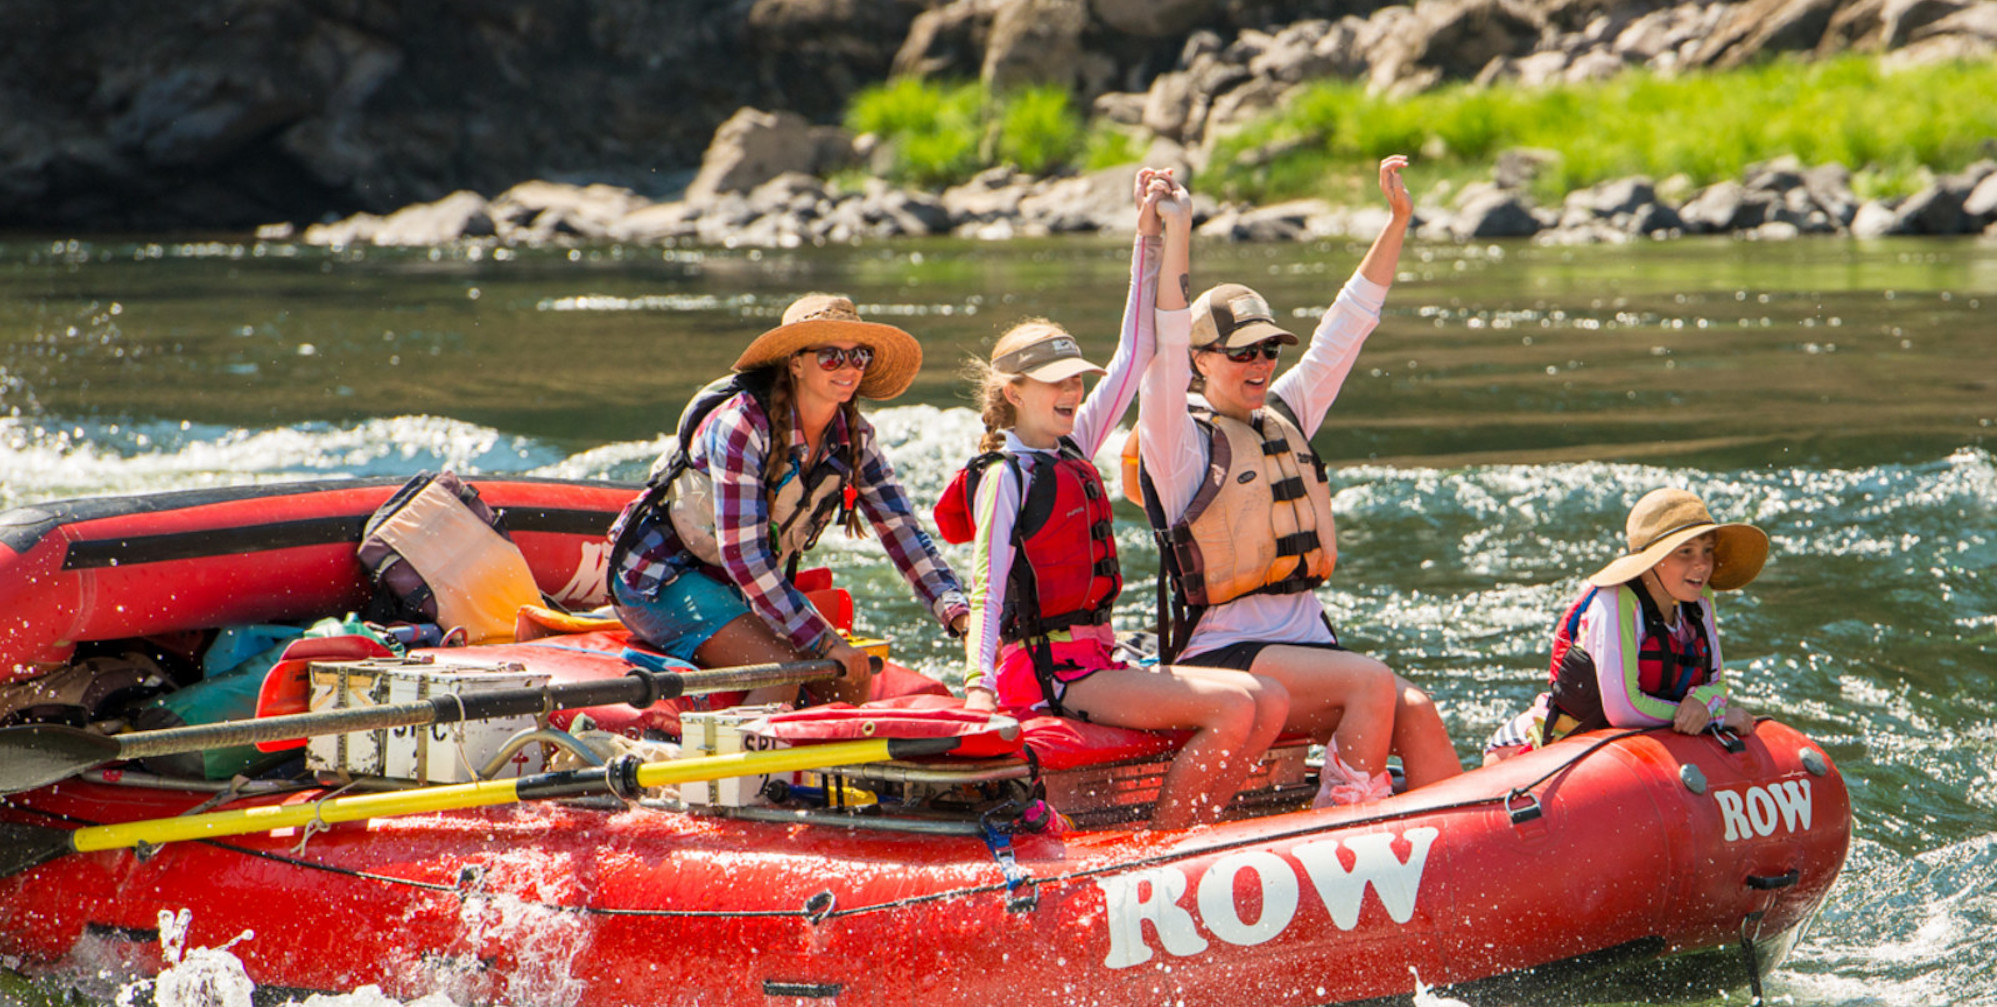 Mom on the front of a red raft with her daughter and son smiling and holding their arms up as they are rowed through a rapid on the Lower Salmon river